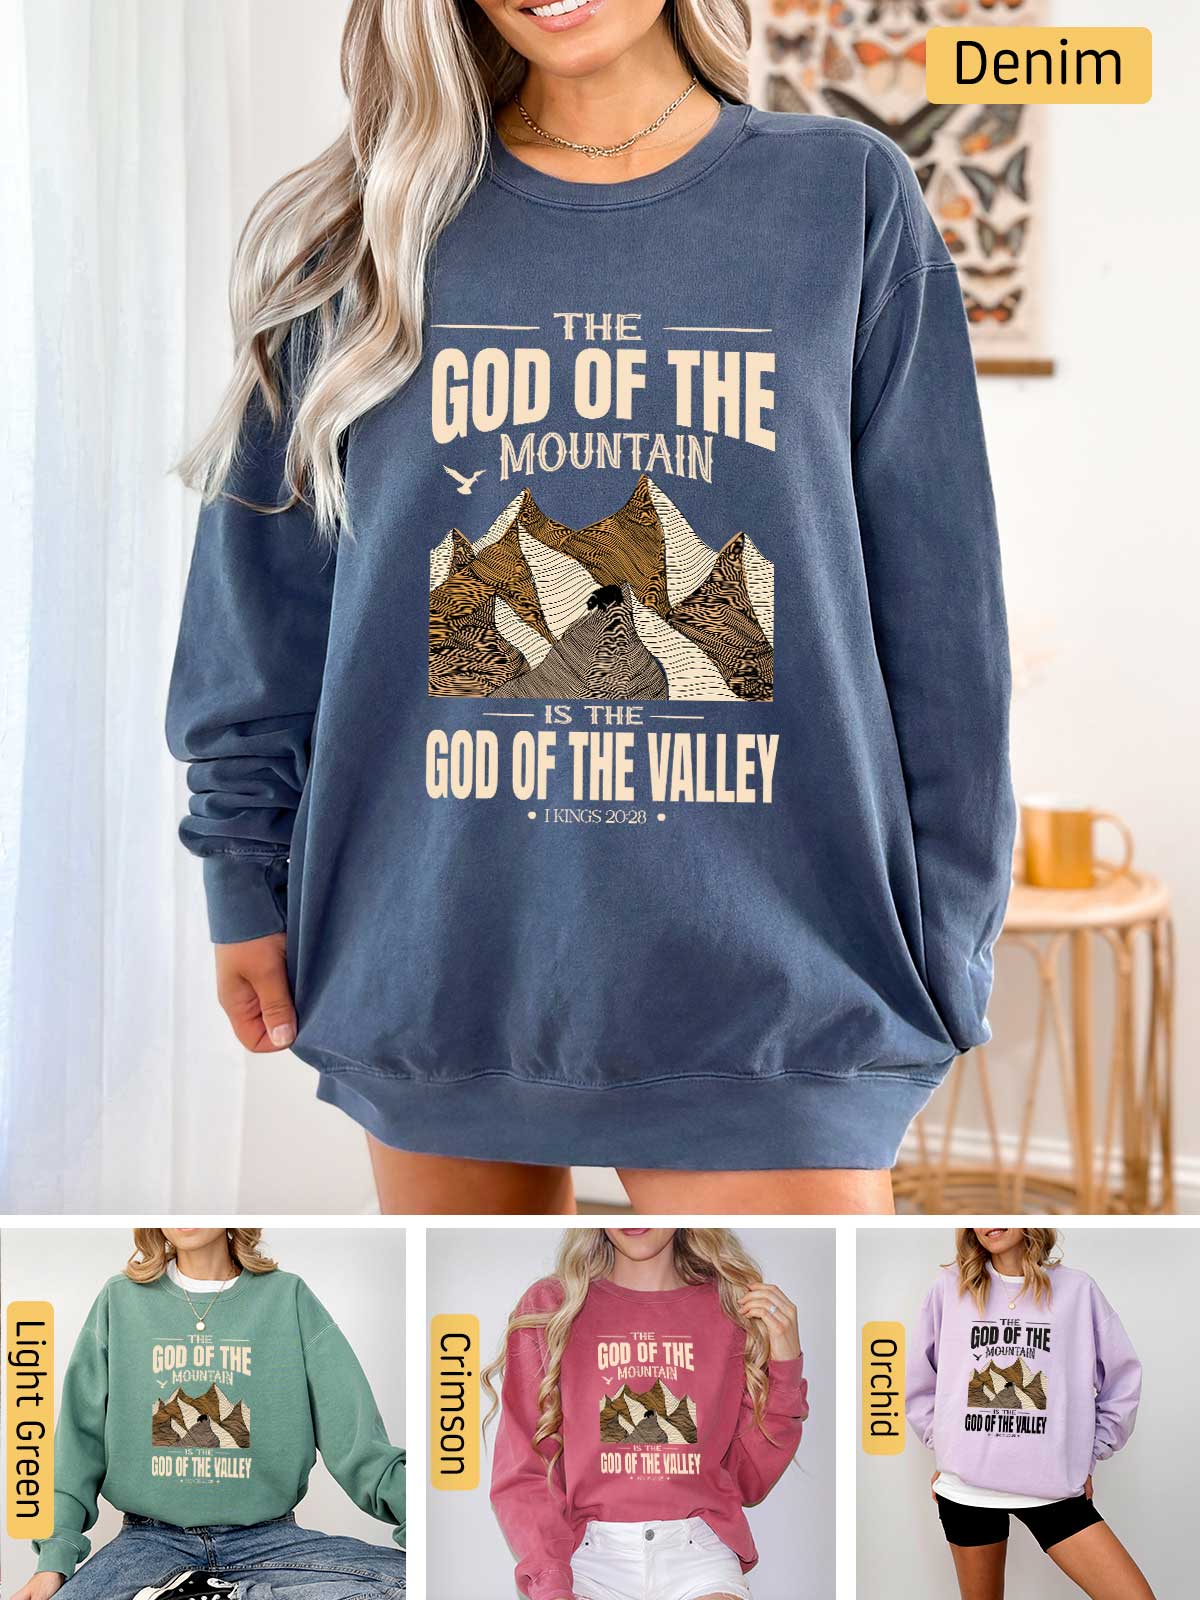 a woman wearing a sweatshirt that says the god of the mountain is the god of